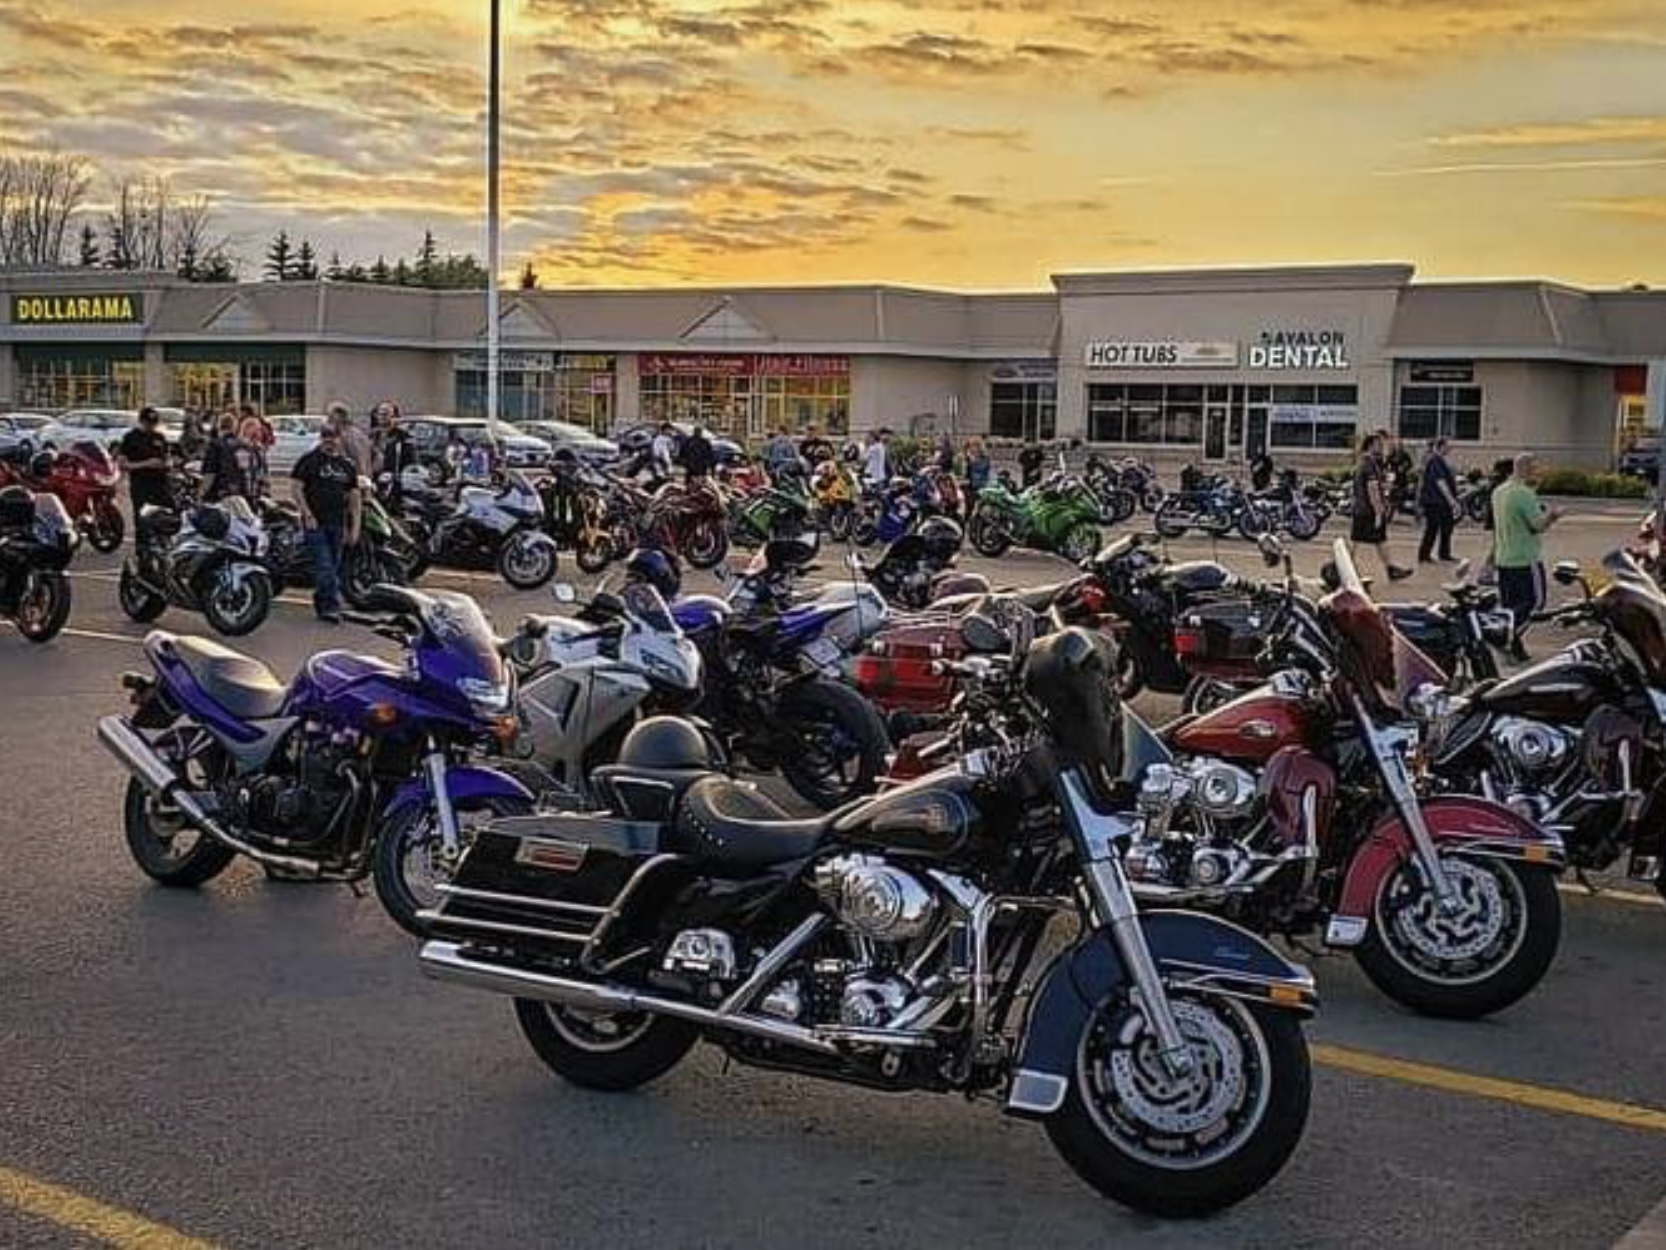 A strip mall parking lot filled with rows of parked motorcycles and groups of people standing around visiting under a golden sunset on a summer evening. 